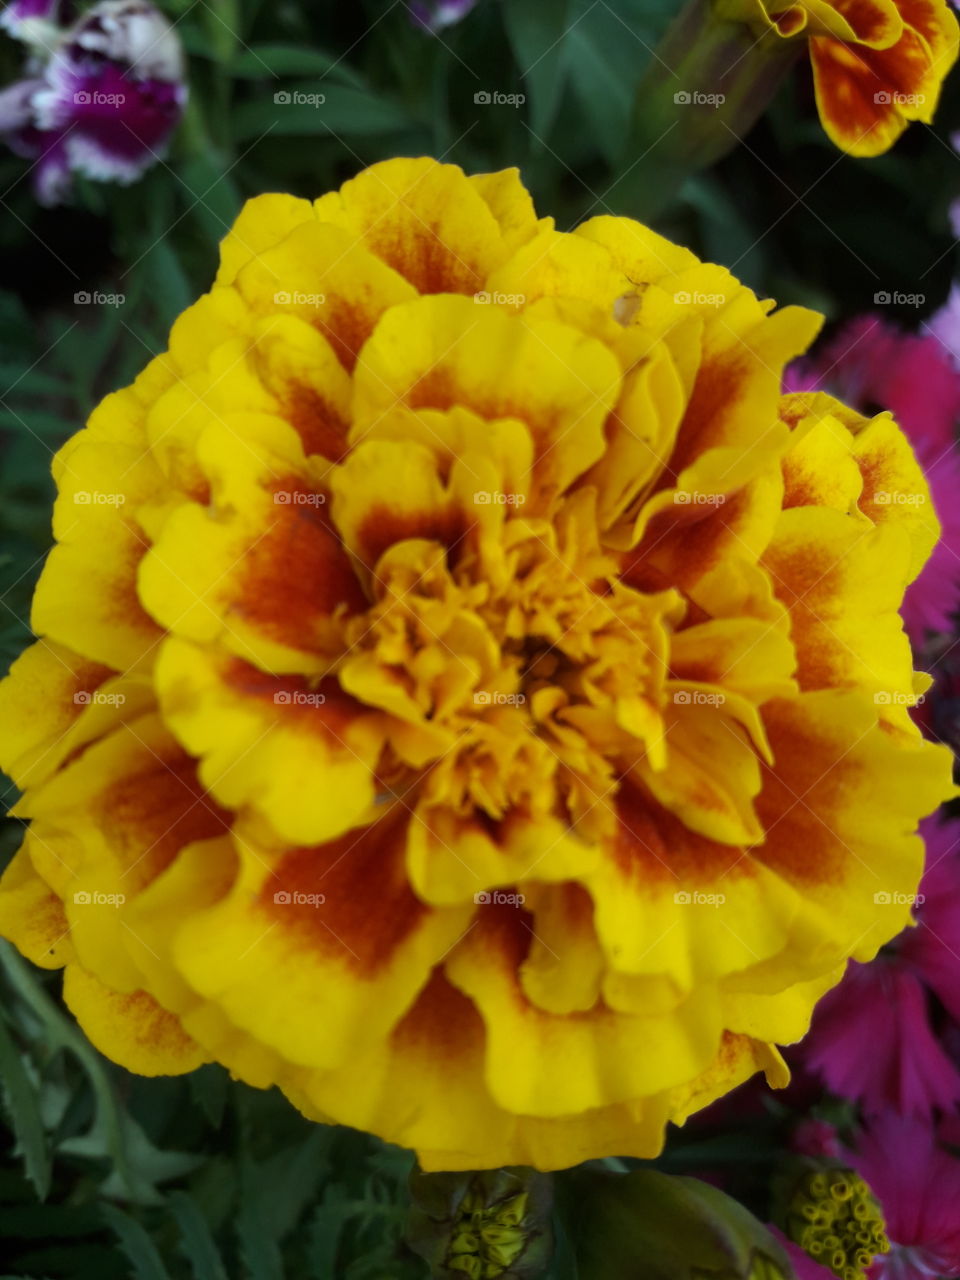 colorful yellow flower has several stacked petals.